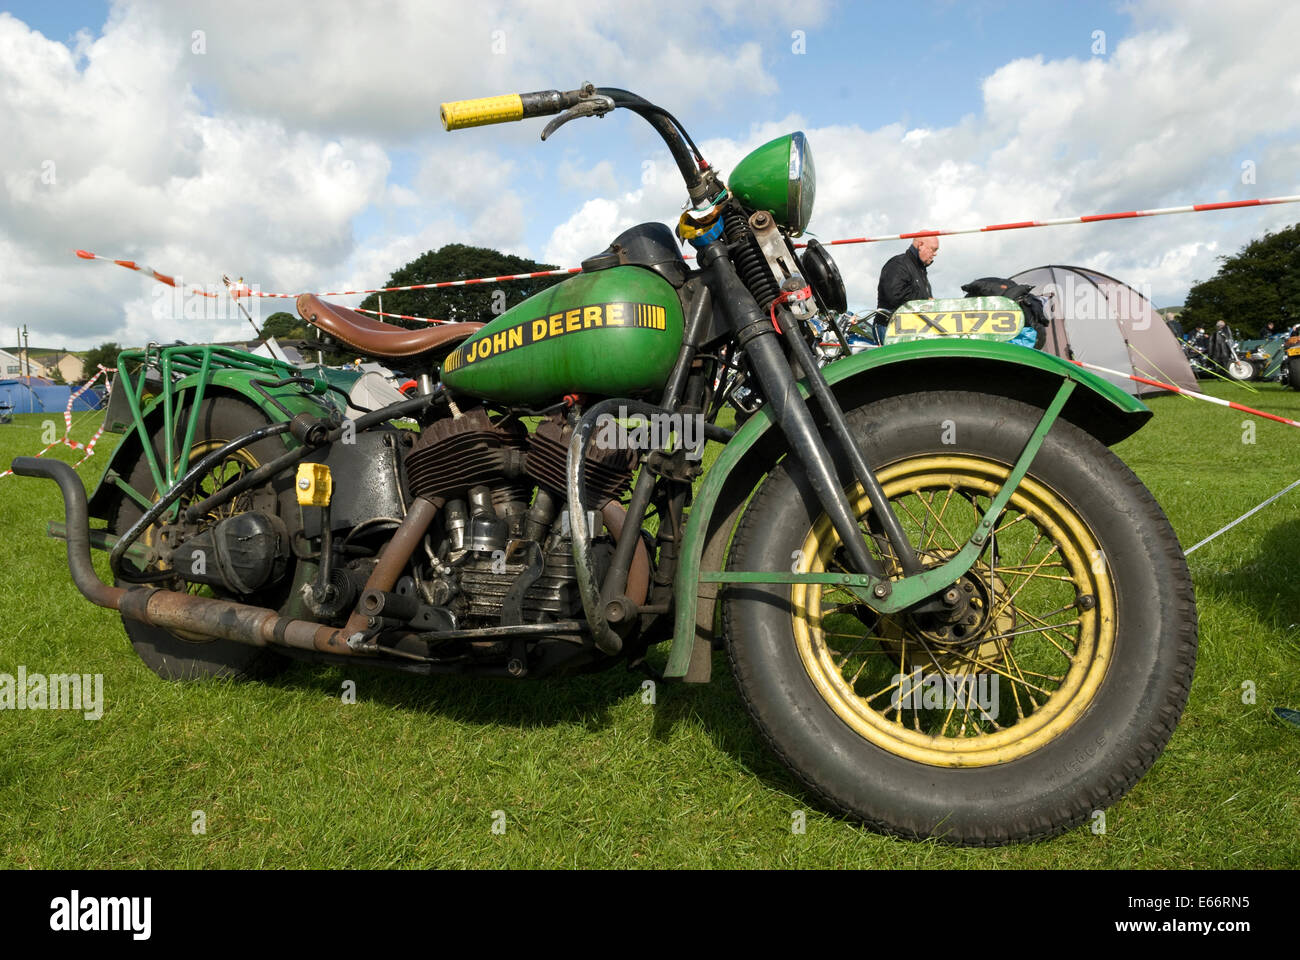 Customized Bike High Resolution Stock Photography and Images - Alamy